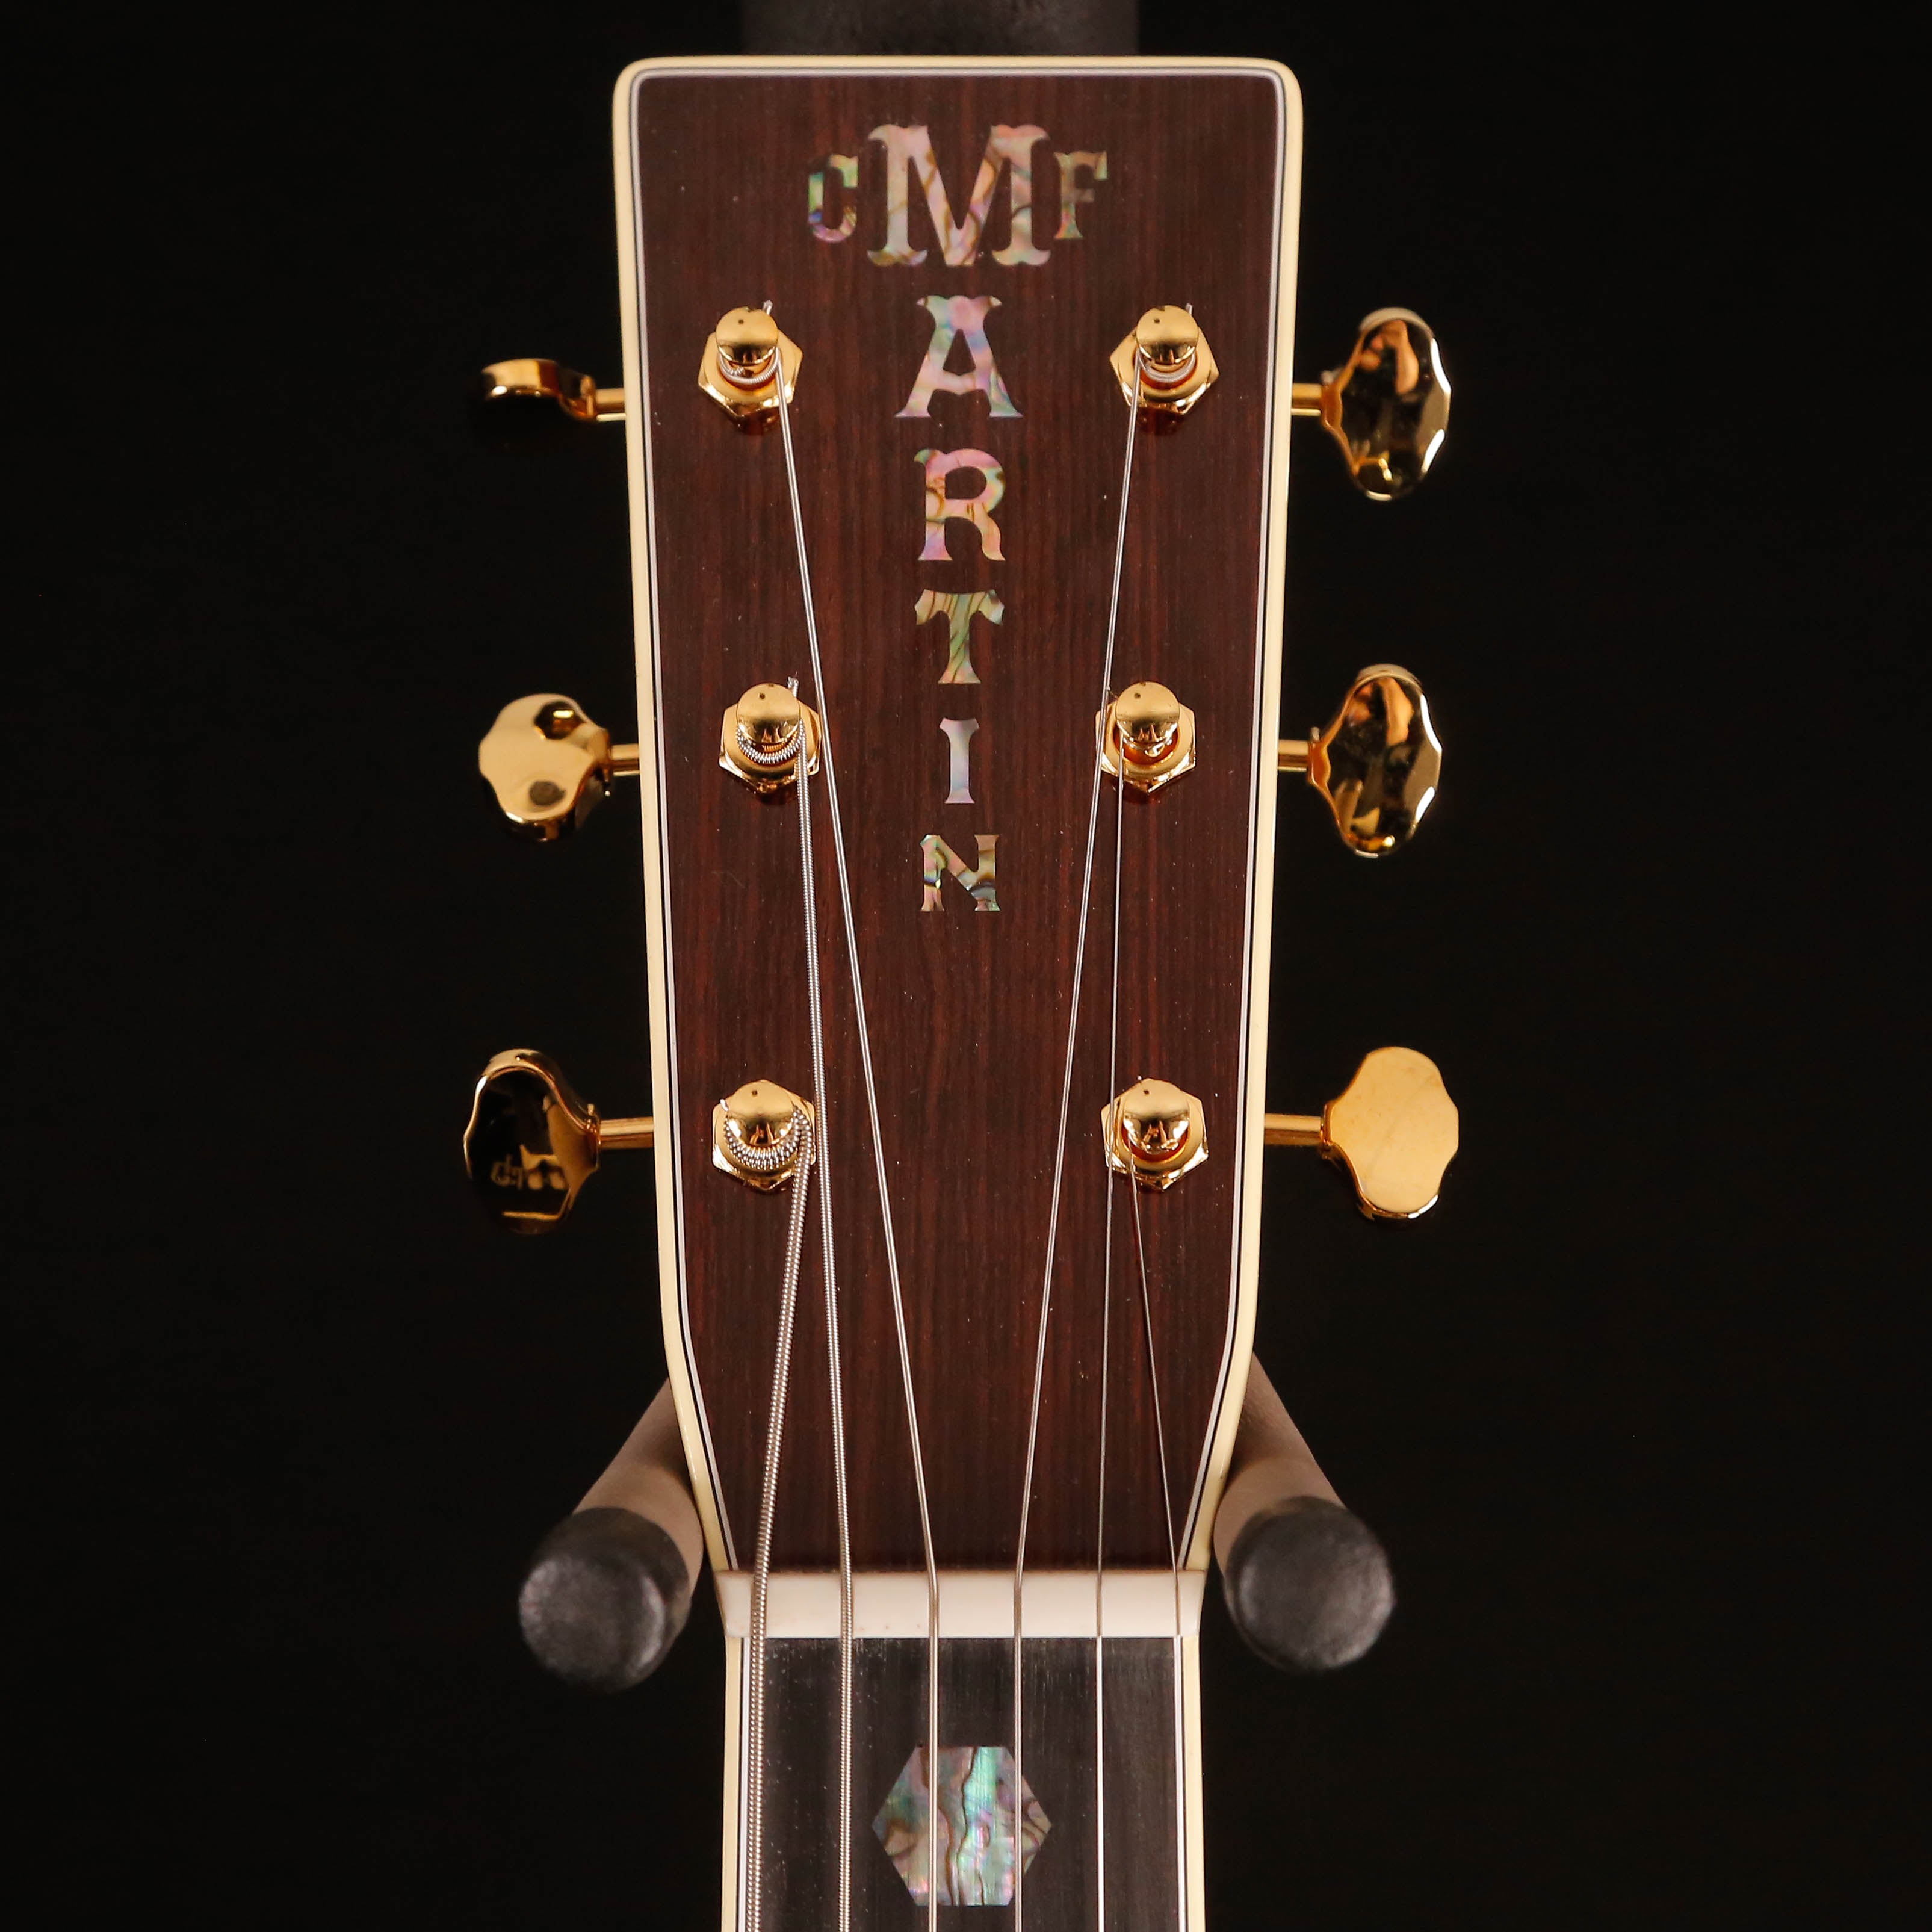 Martin OM-28 Standard Series (Case Included) w TONERITE AGING! 4lbs 9.7oz